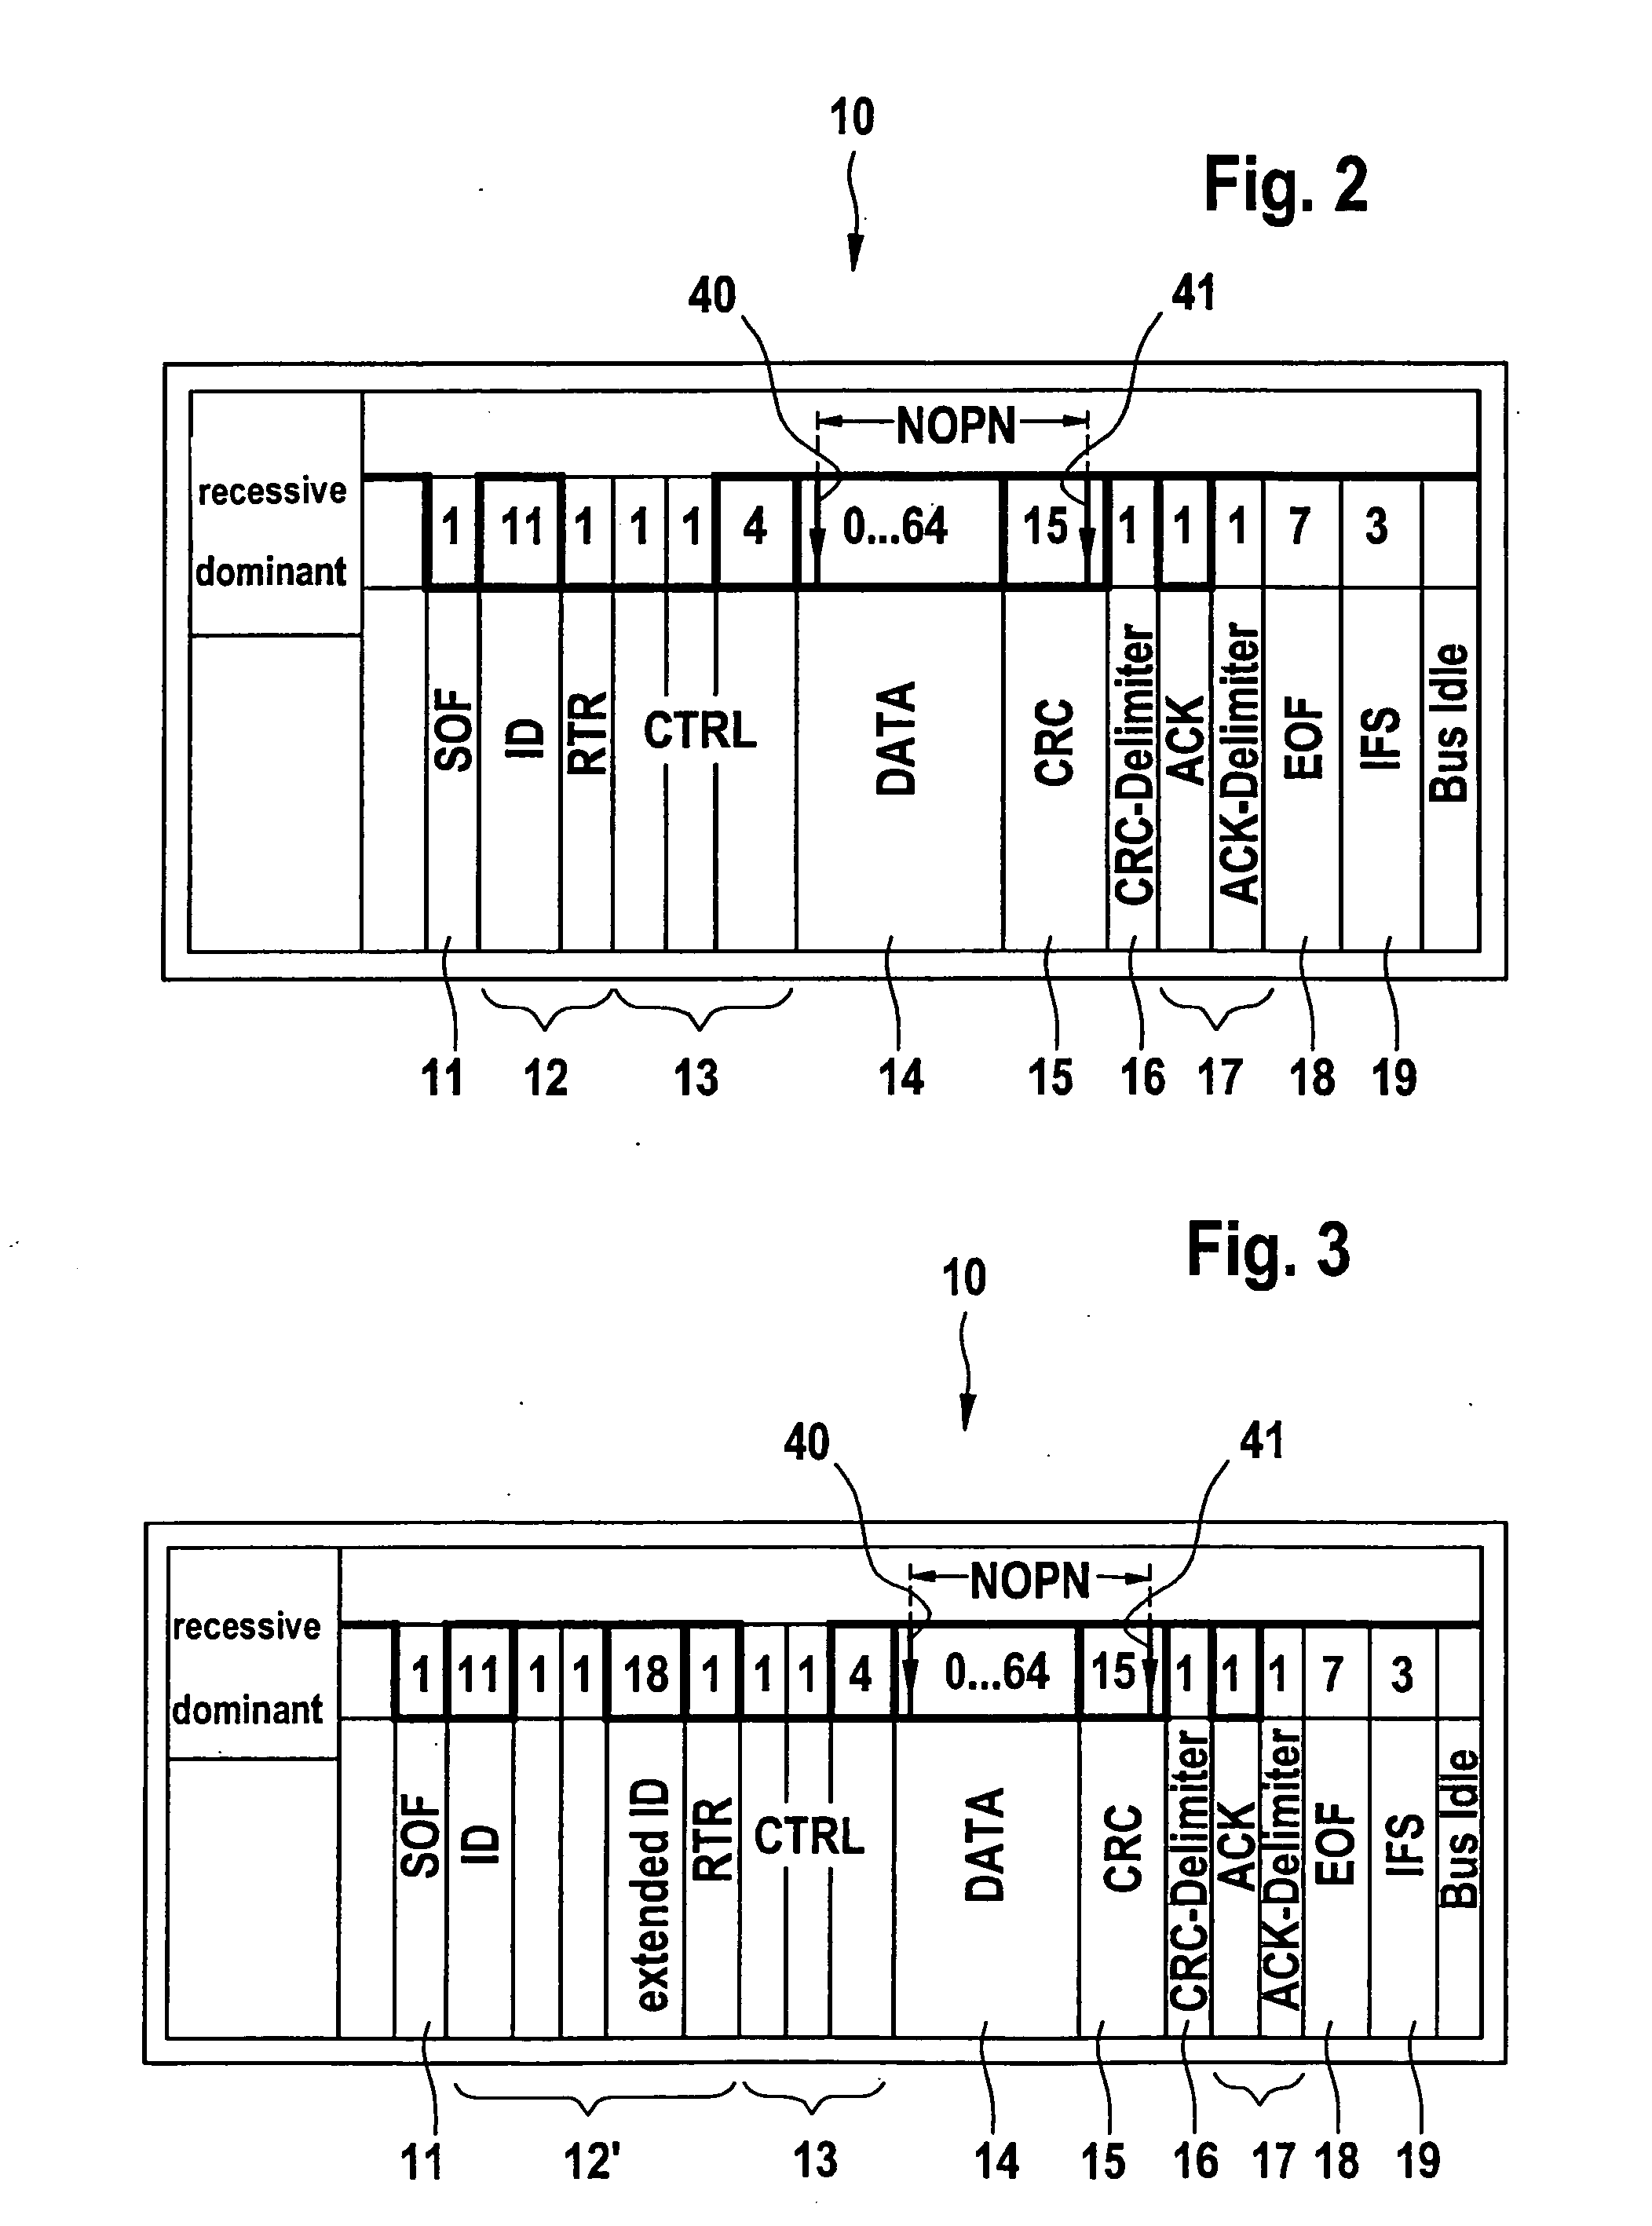 Communication system including a data bus and multiple user nodes connected thereto, and method for operating such a communication system